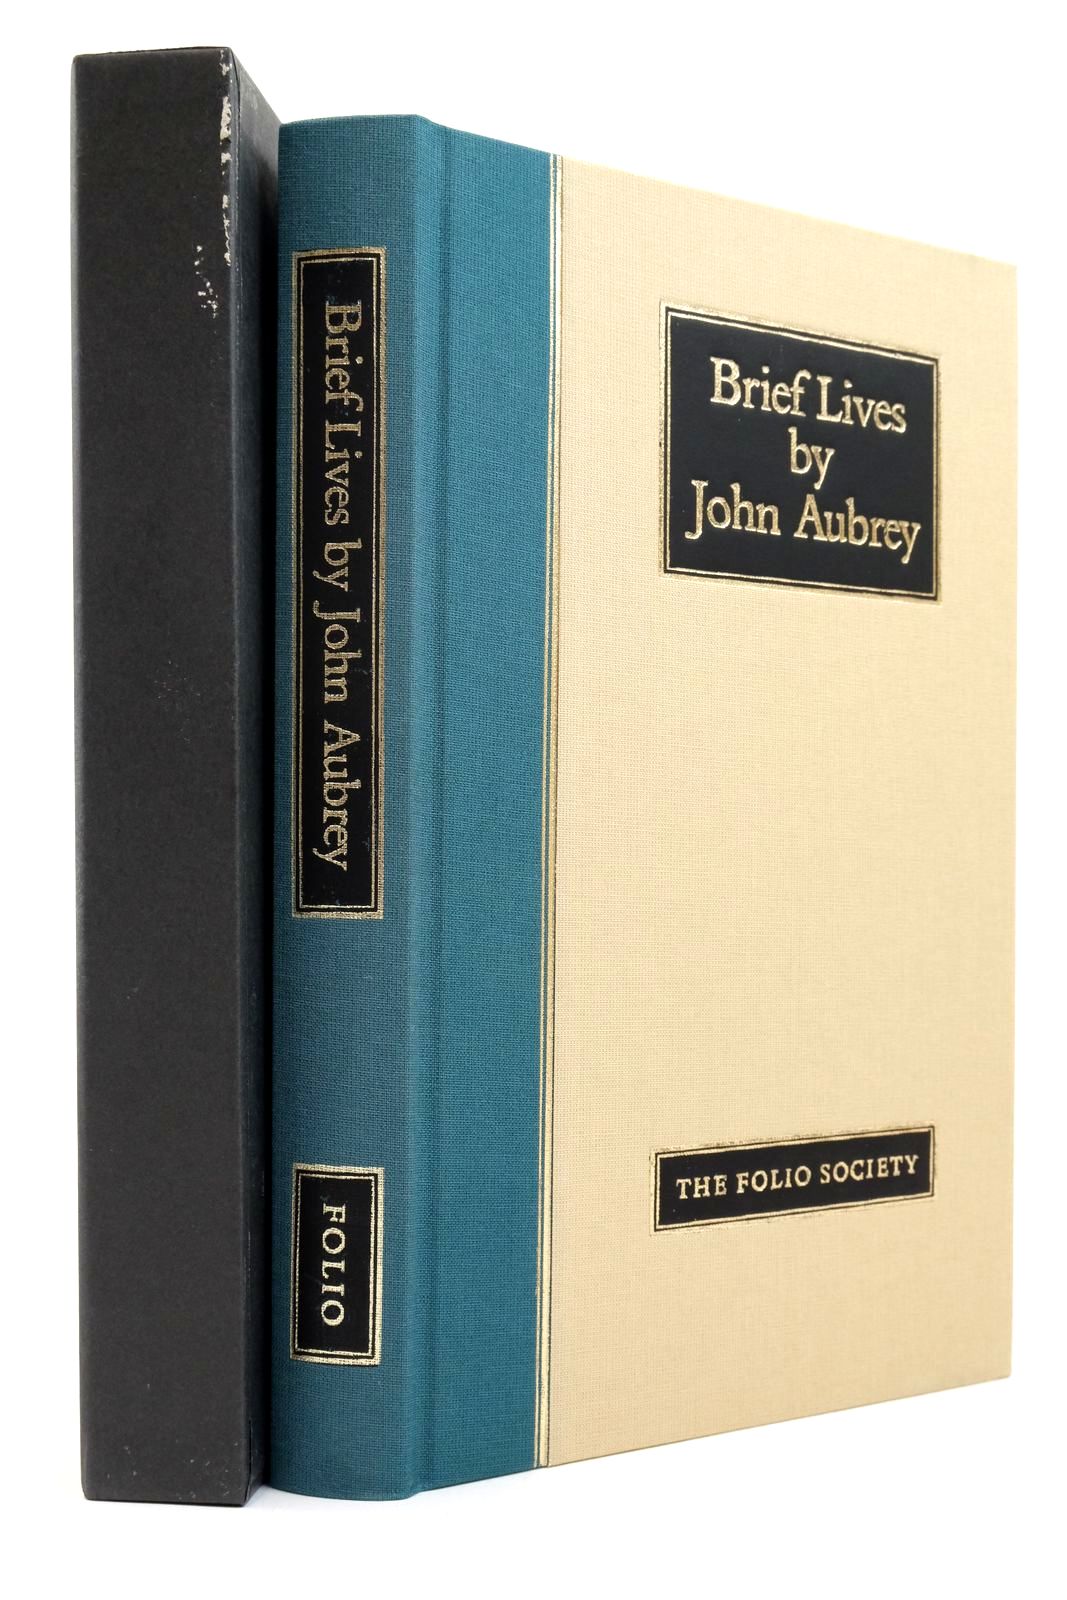 Photo of BRIEF LIVES written by Aubrey, John Barber, Richard published by Folio Society (STOCK CODE: 2138424)  for sale by Stella & Rose's Books